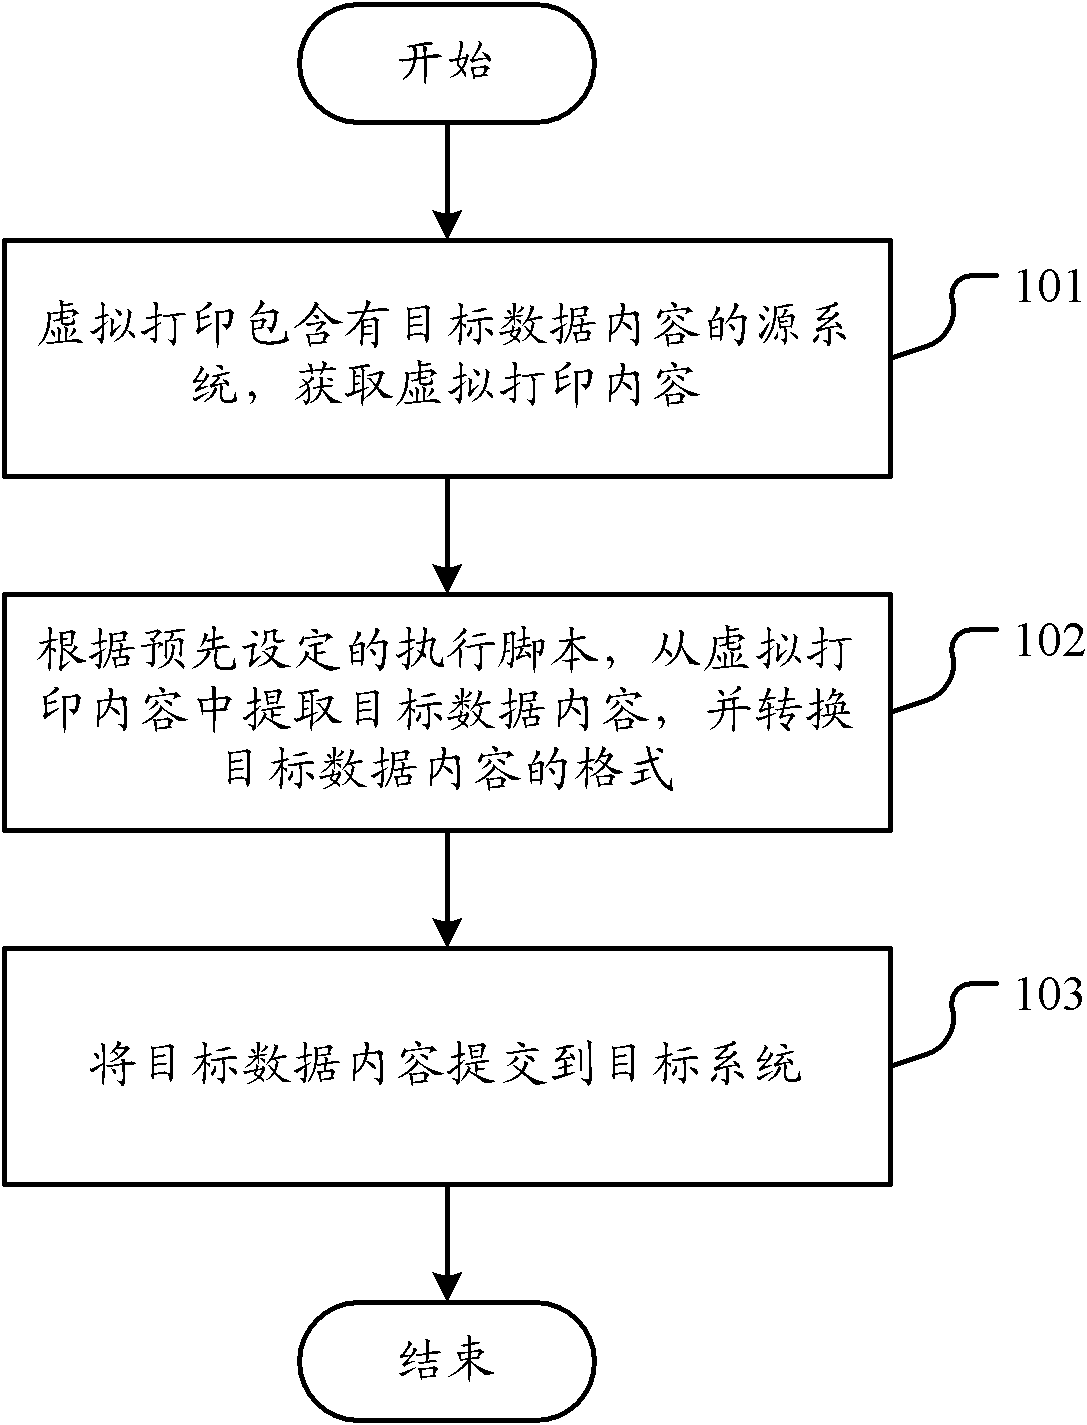 Method and system for acquiring data based on virtual printing manner